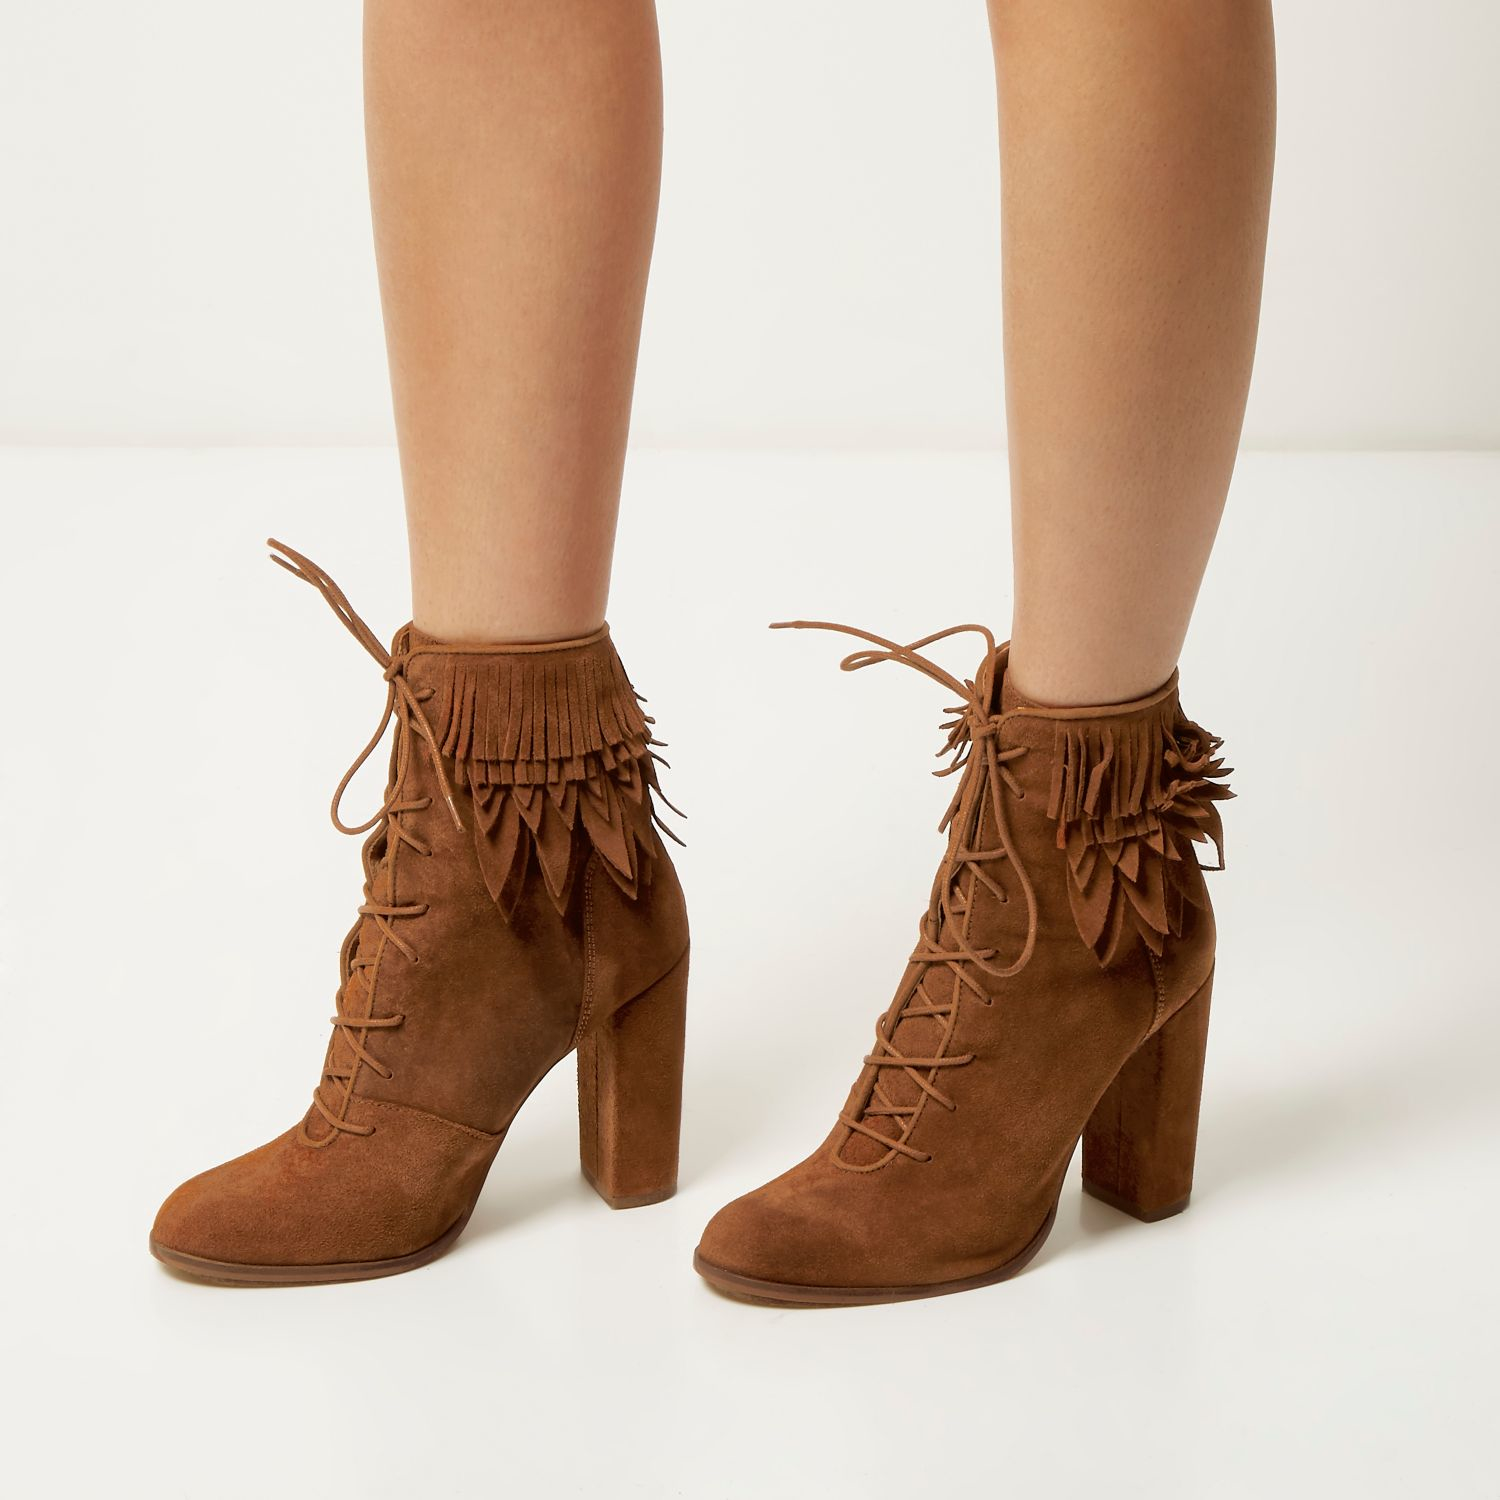 River Island Tan Suede Laceup Fringed Heeled Boots in